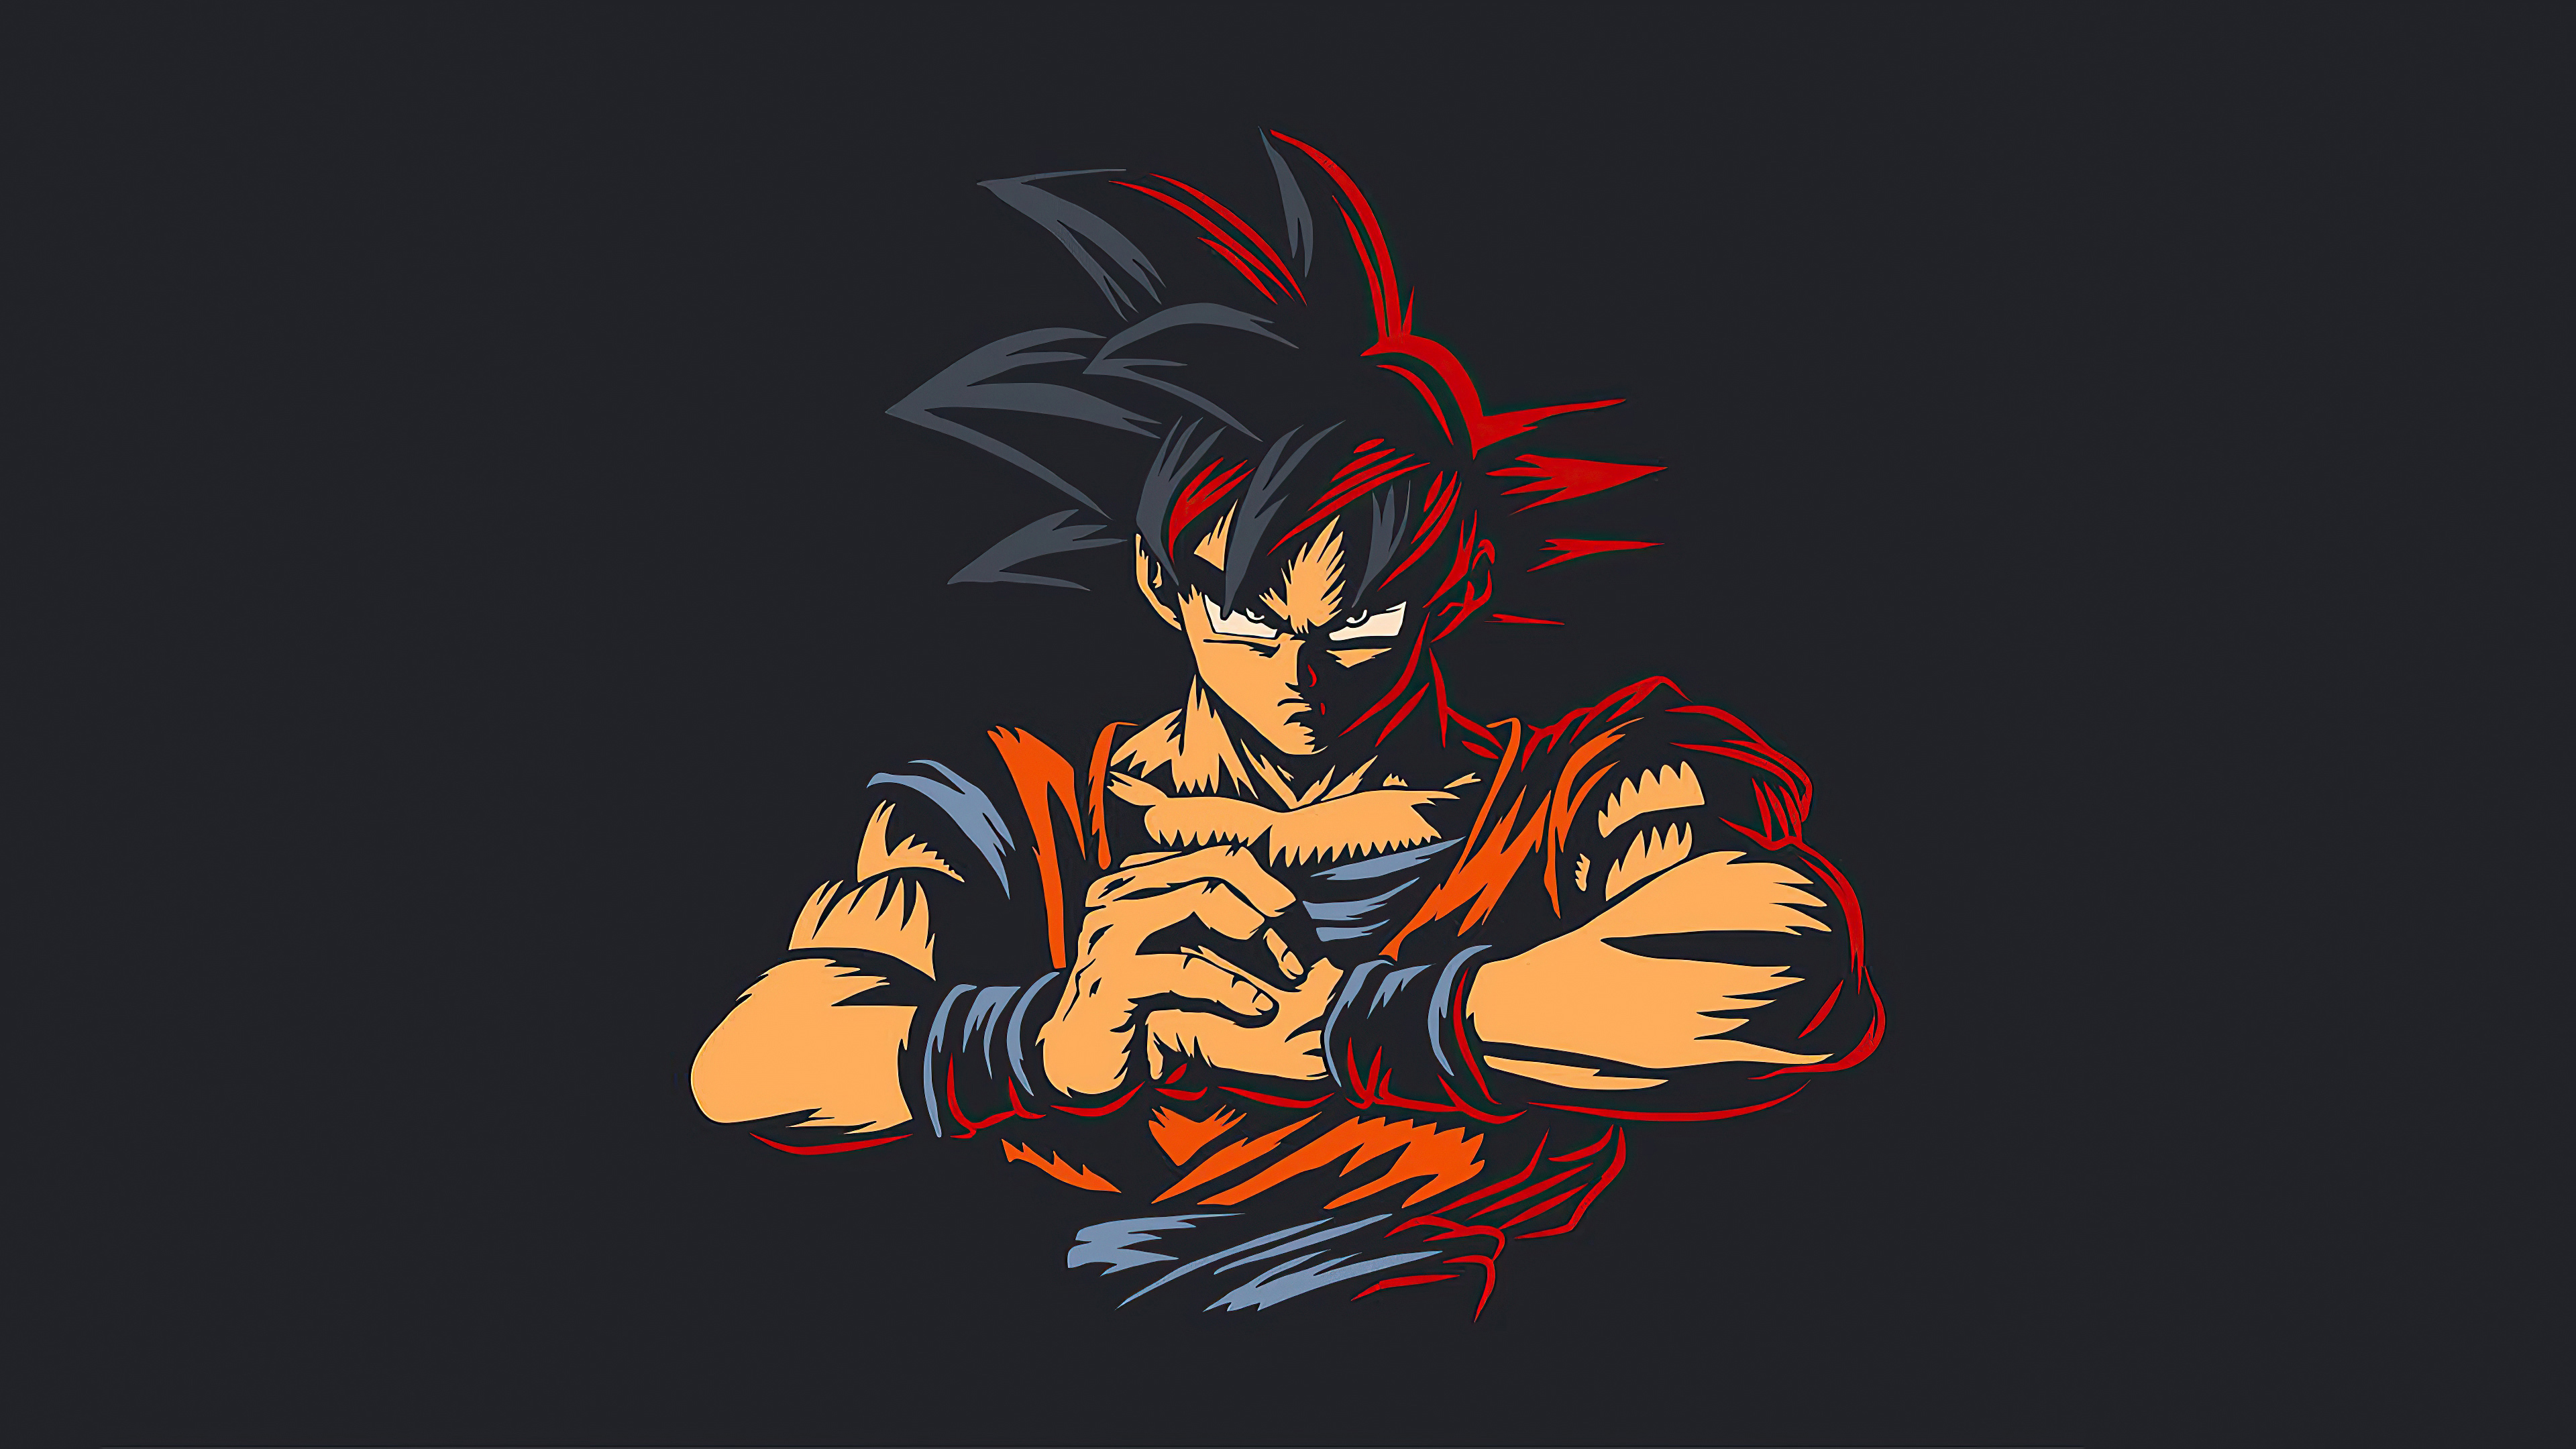 Goku Gets Angry in 4K. 3 Different Styles! 4K PC Wallpapers :  r/DragonballLegends